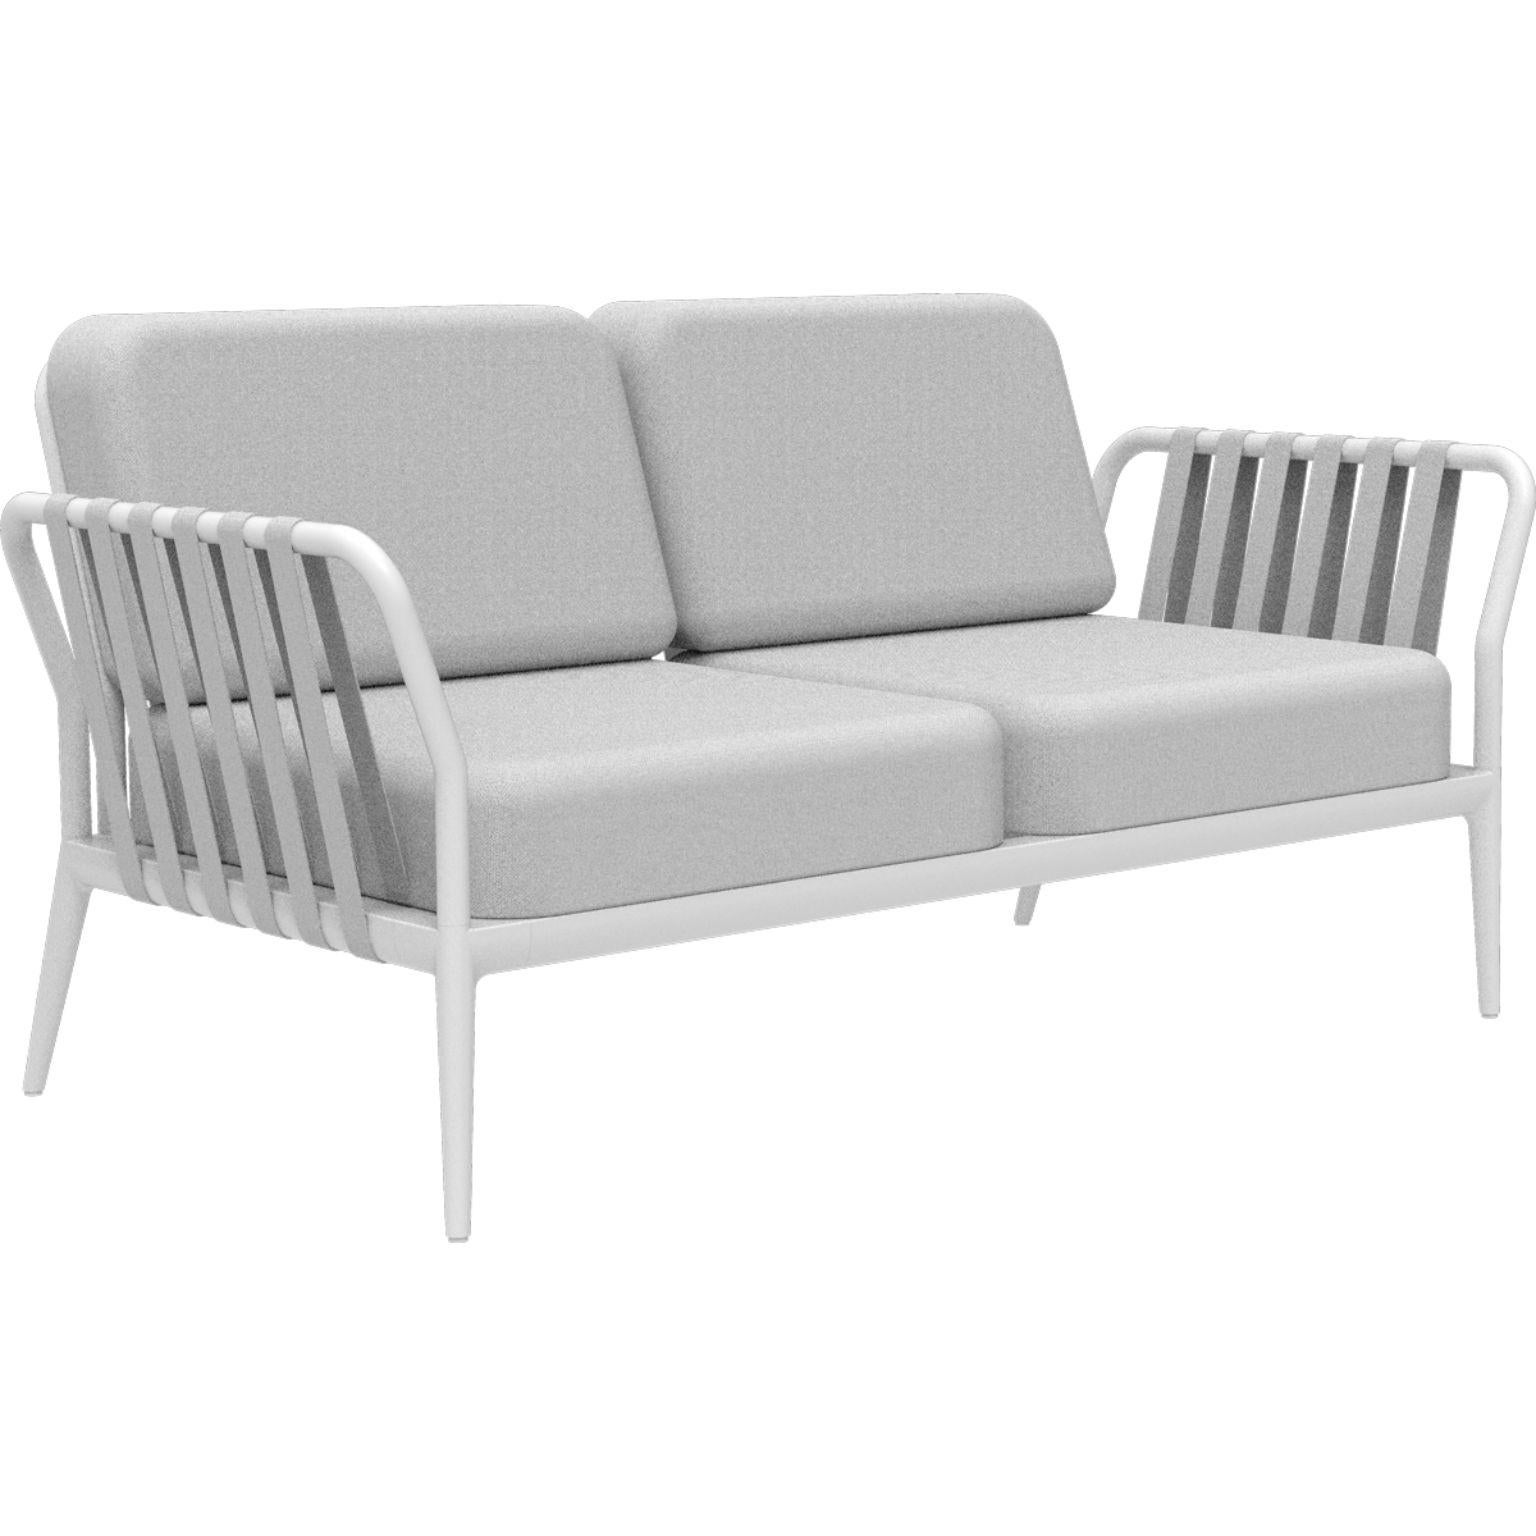 Ribbons white sofa by MOWEE
Dimensions: D83 x W160 x H81 cm
Material: Aluminum, Upholstery
Weight: 32 kg
Also available in different colors and finishes. 

An unmistakable collection for its beauty and robustness. A tribute to the Valencian